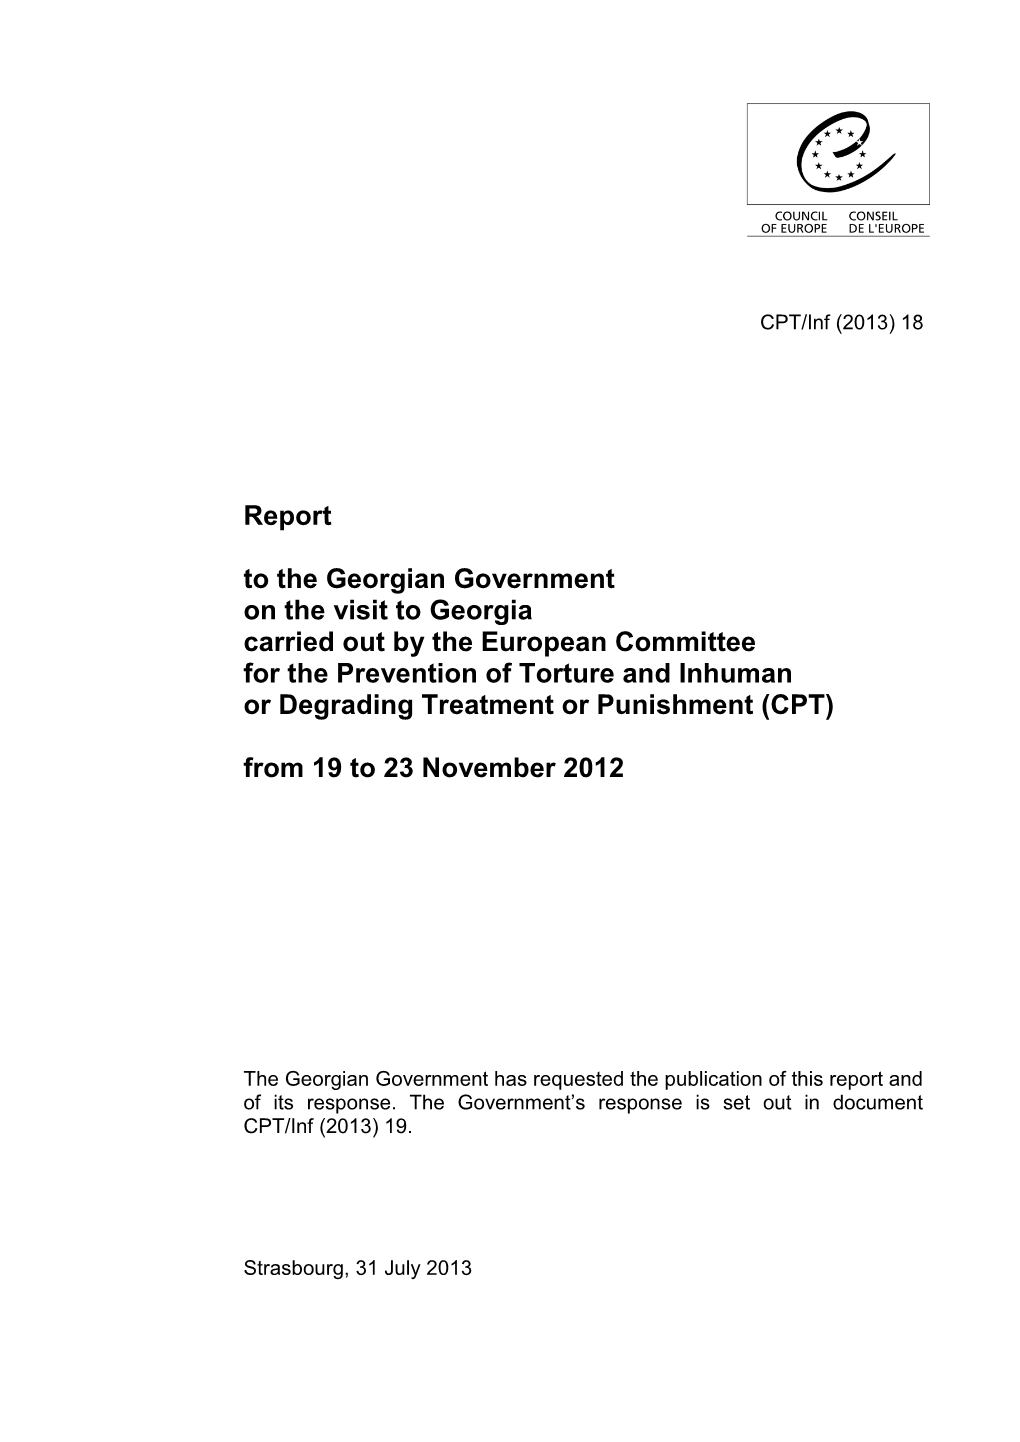 Report to the Georgian Government on the Visit to Georgia